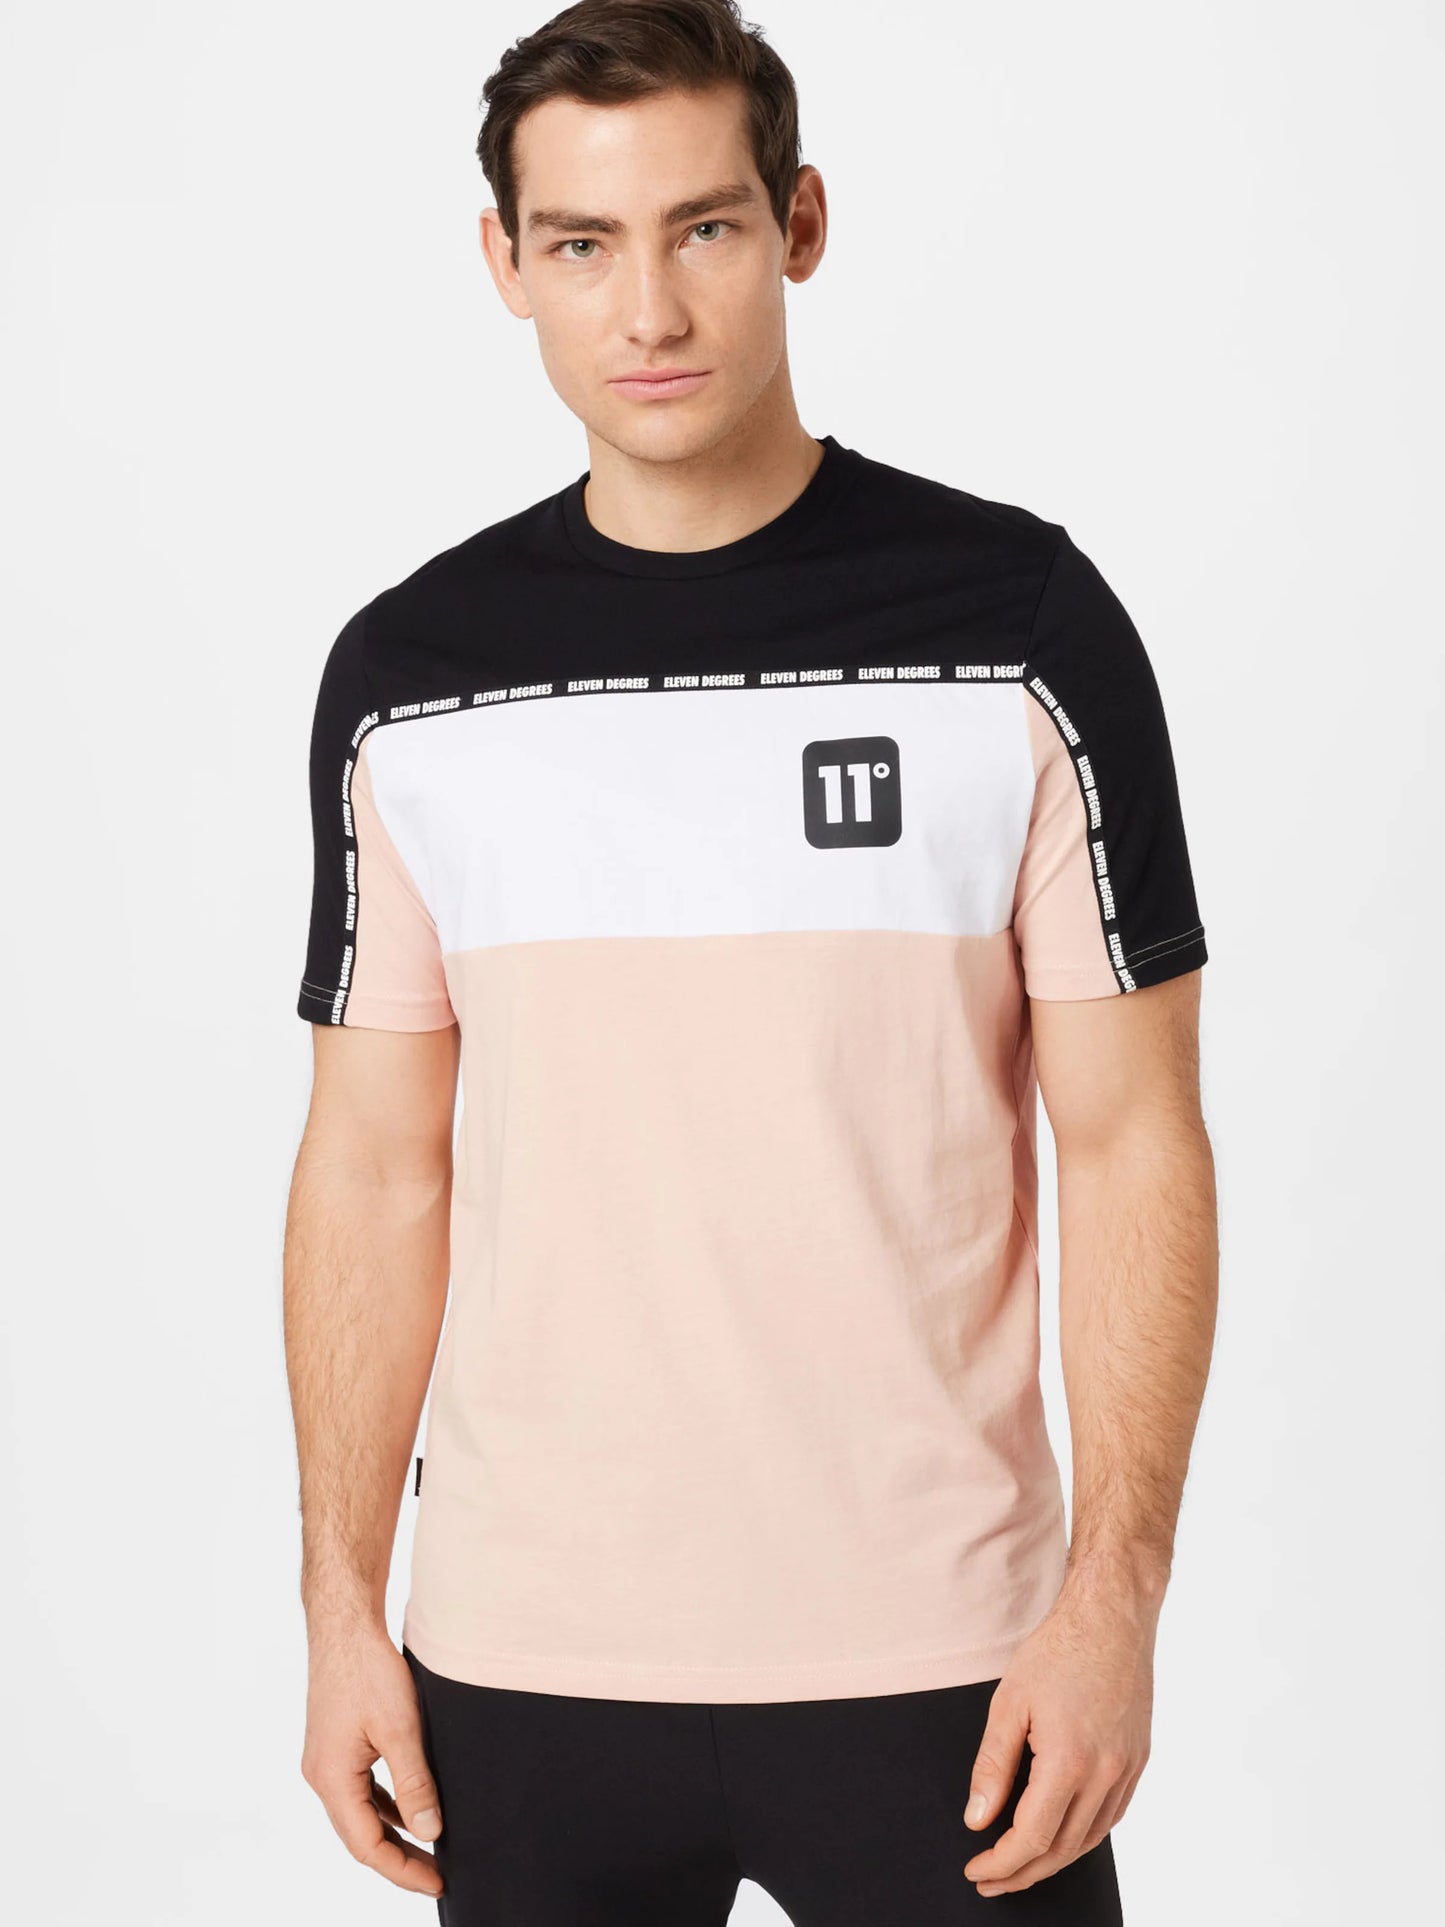 Colour Block Taped Short Sleeve T-Shirt – Black / Putty Pink / White